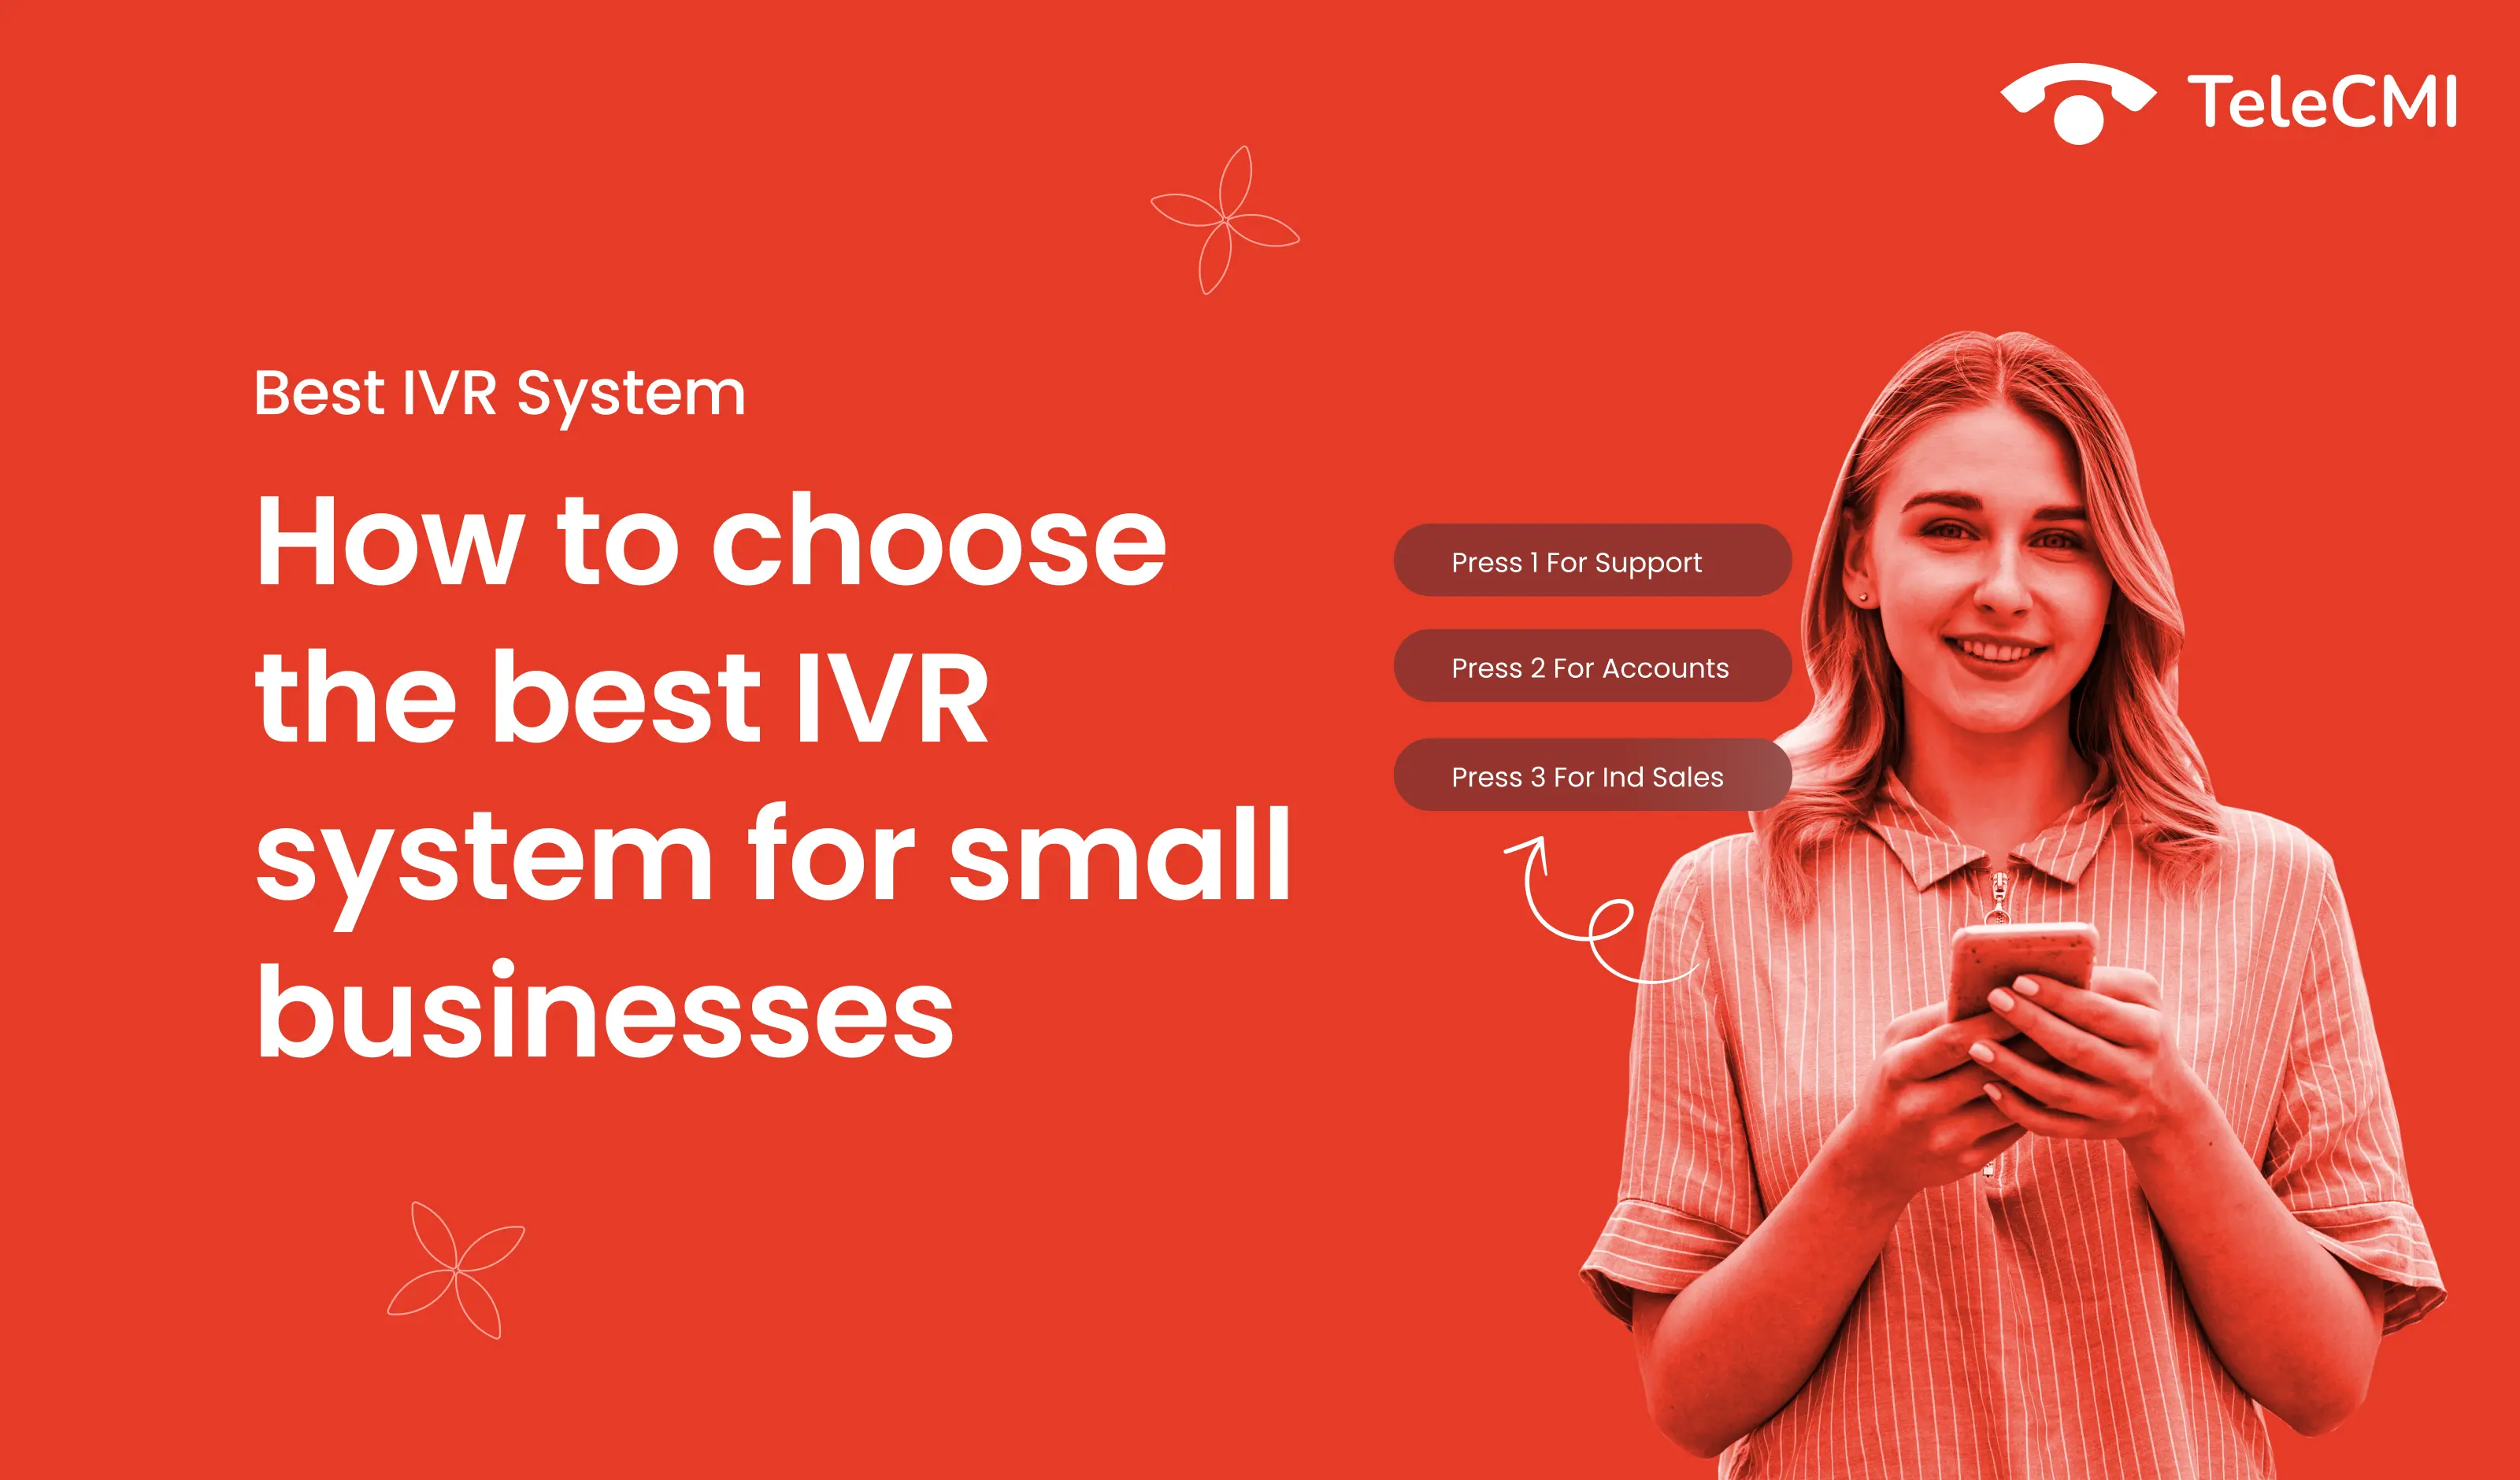 How to Choose the Best IVR System for Small Businesses